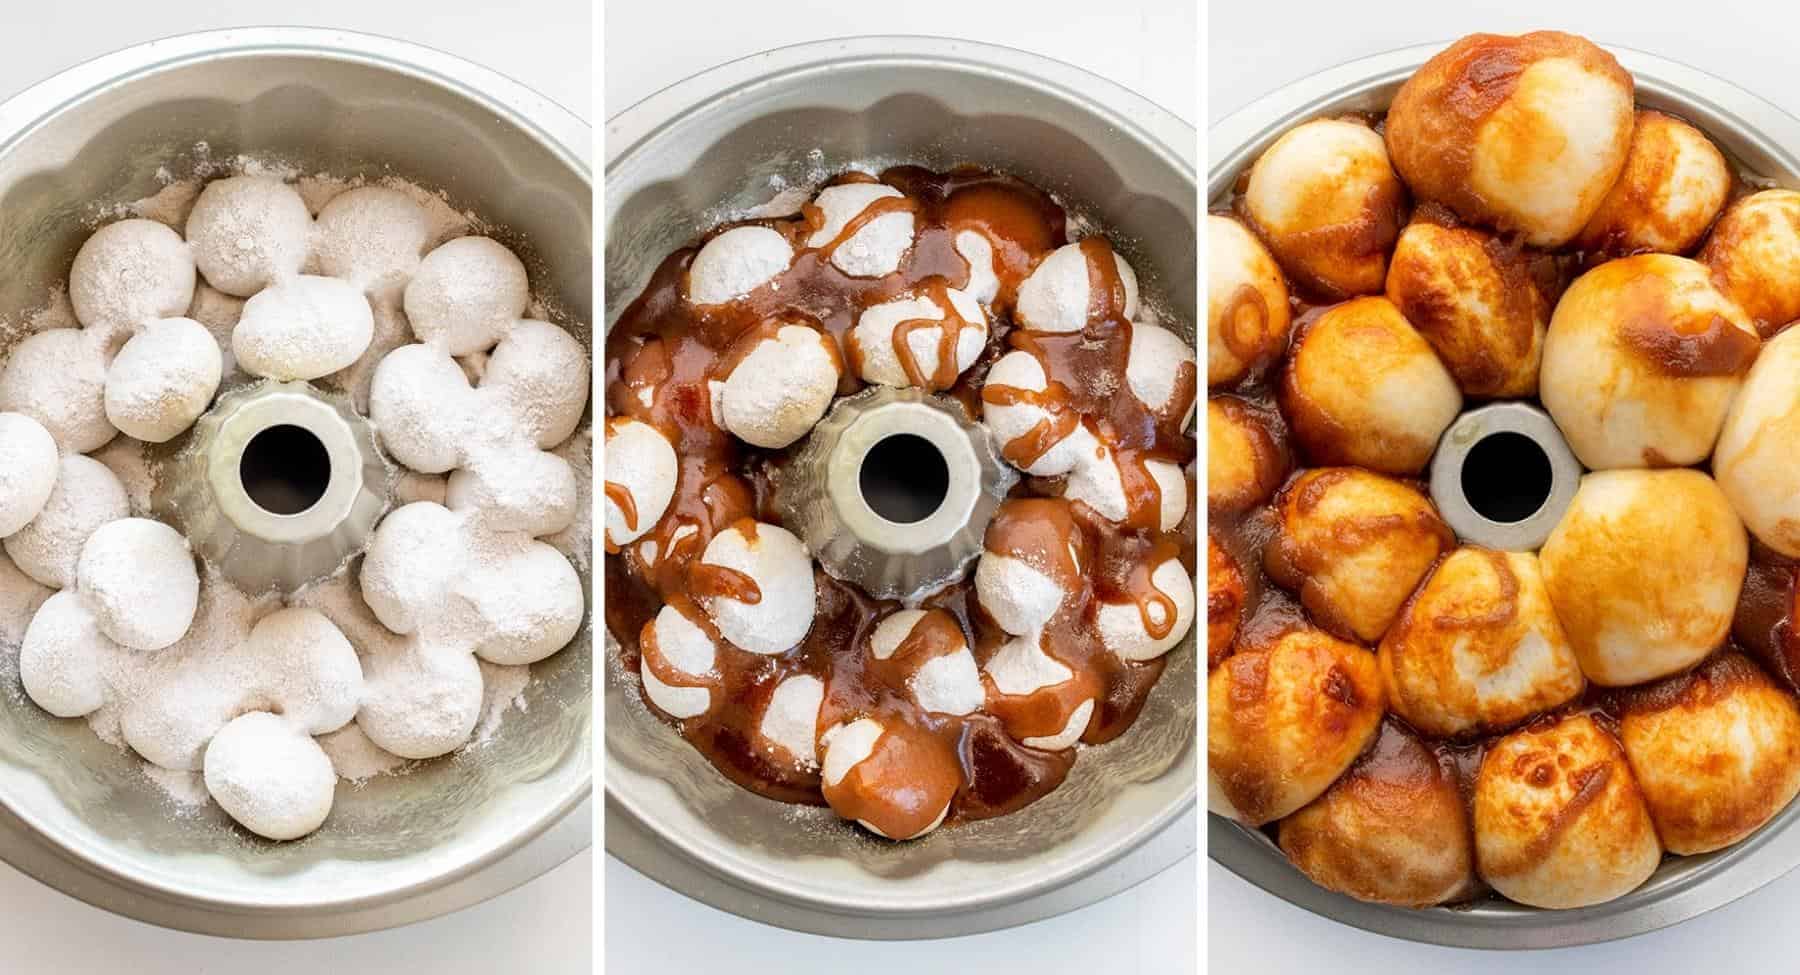 Steps for Making 5 Ingredient Monkey Bread - rolls, then pudding, then sauce, then rising time